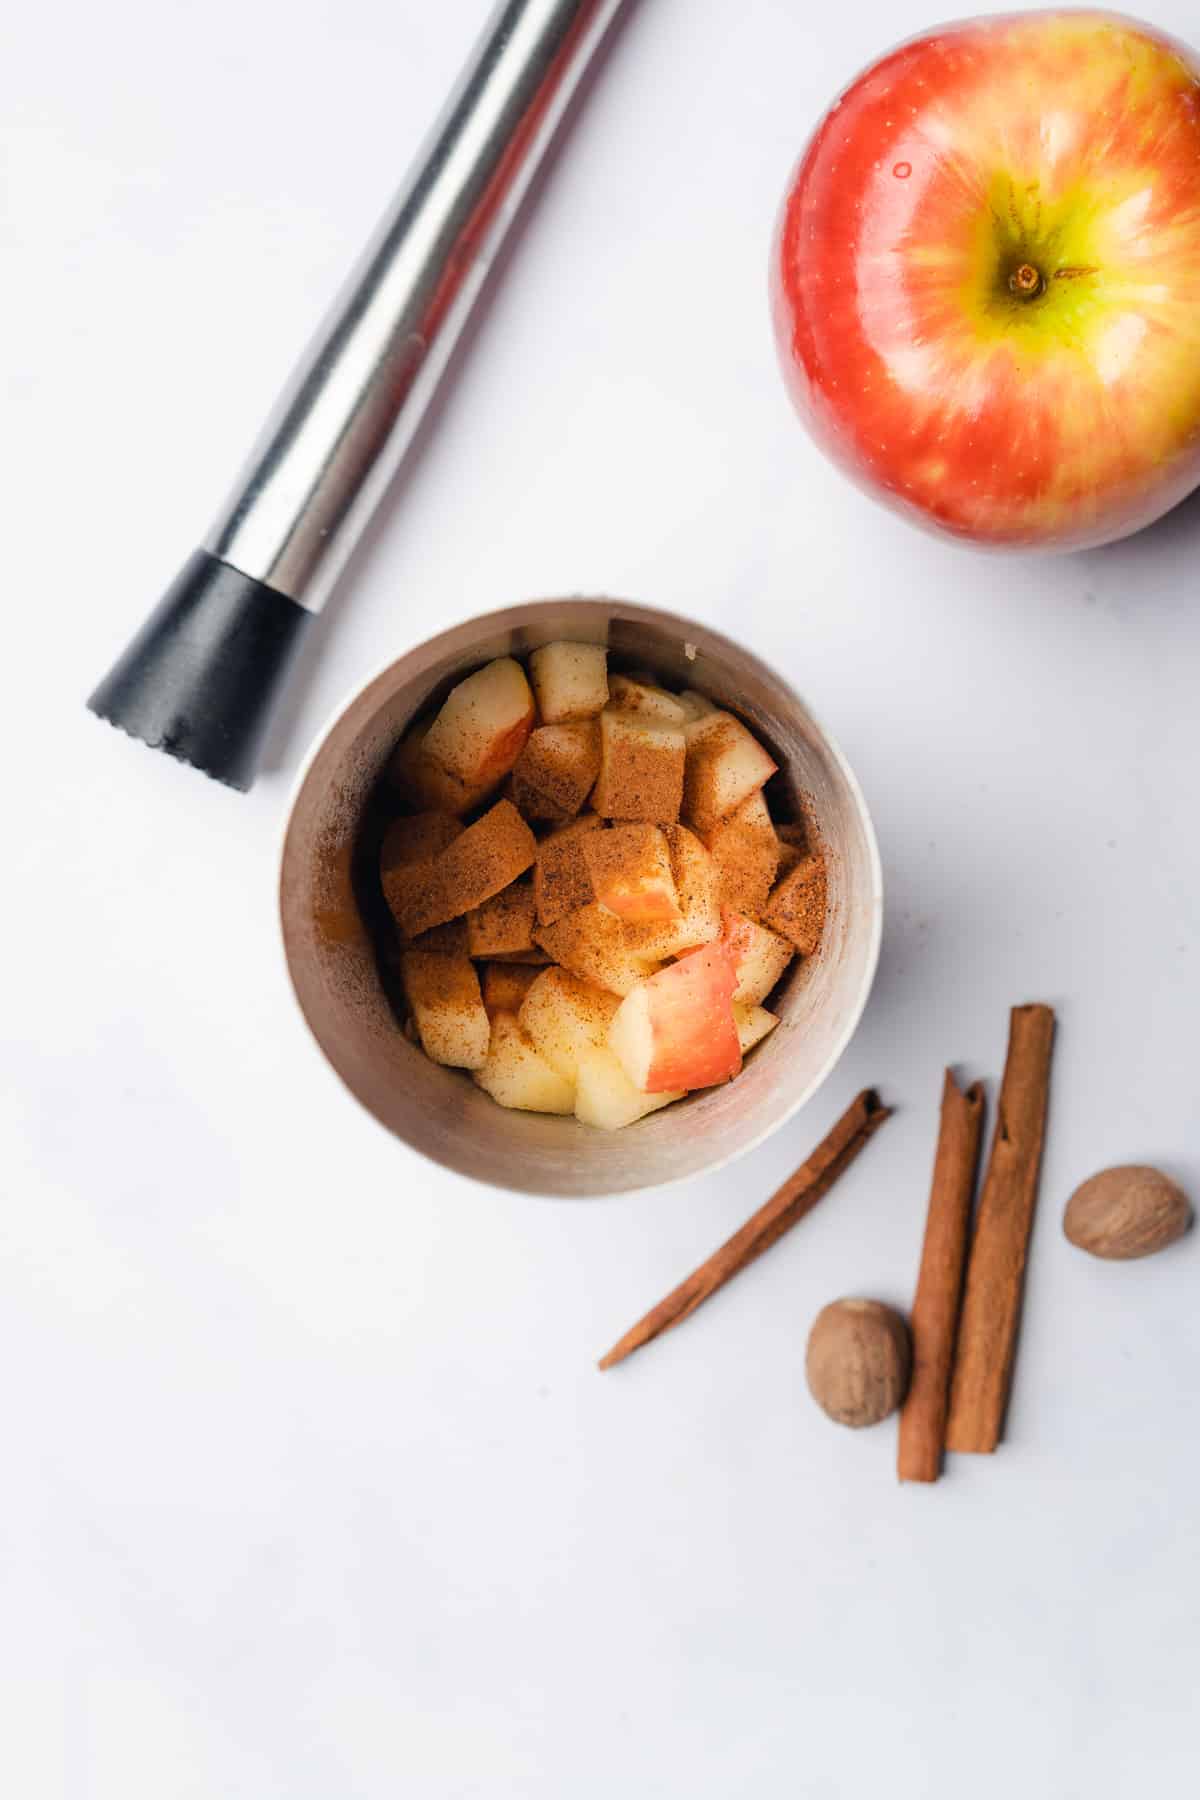 chunks of honey crisp apple  topped with cinnamon and nutmegat the bottom of a cocktail shaker beside a fresh apple, cinnamon sticks, nutmeg and a muddler